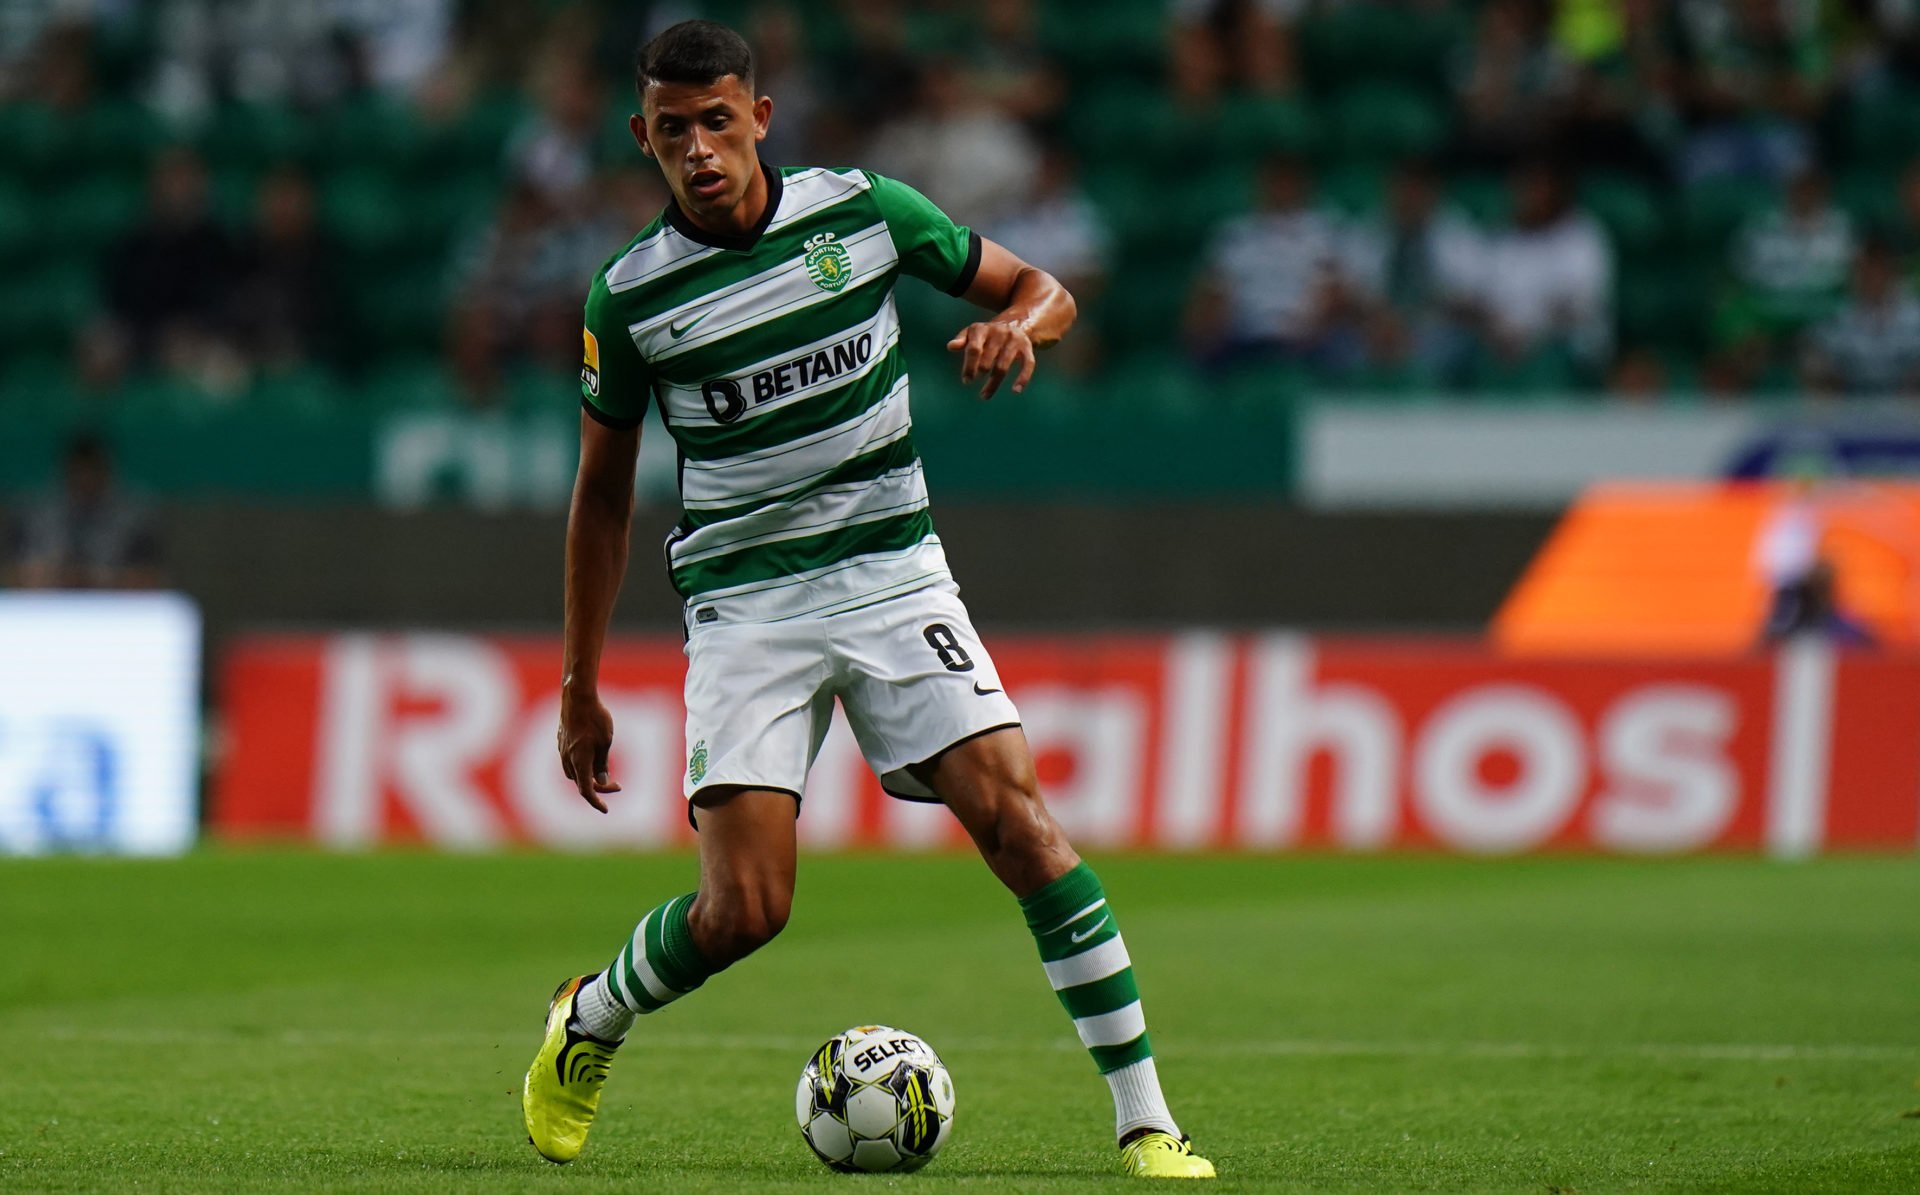 Report: Matheus Nunes is surprisingly still wanted at West Ham in spite of Moyes admission